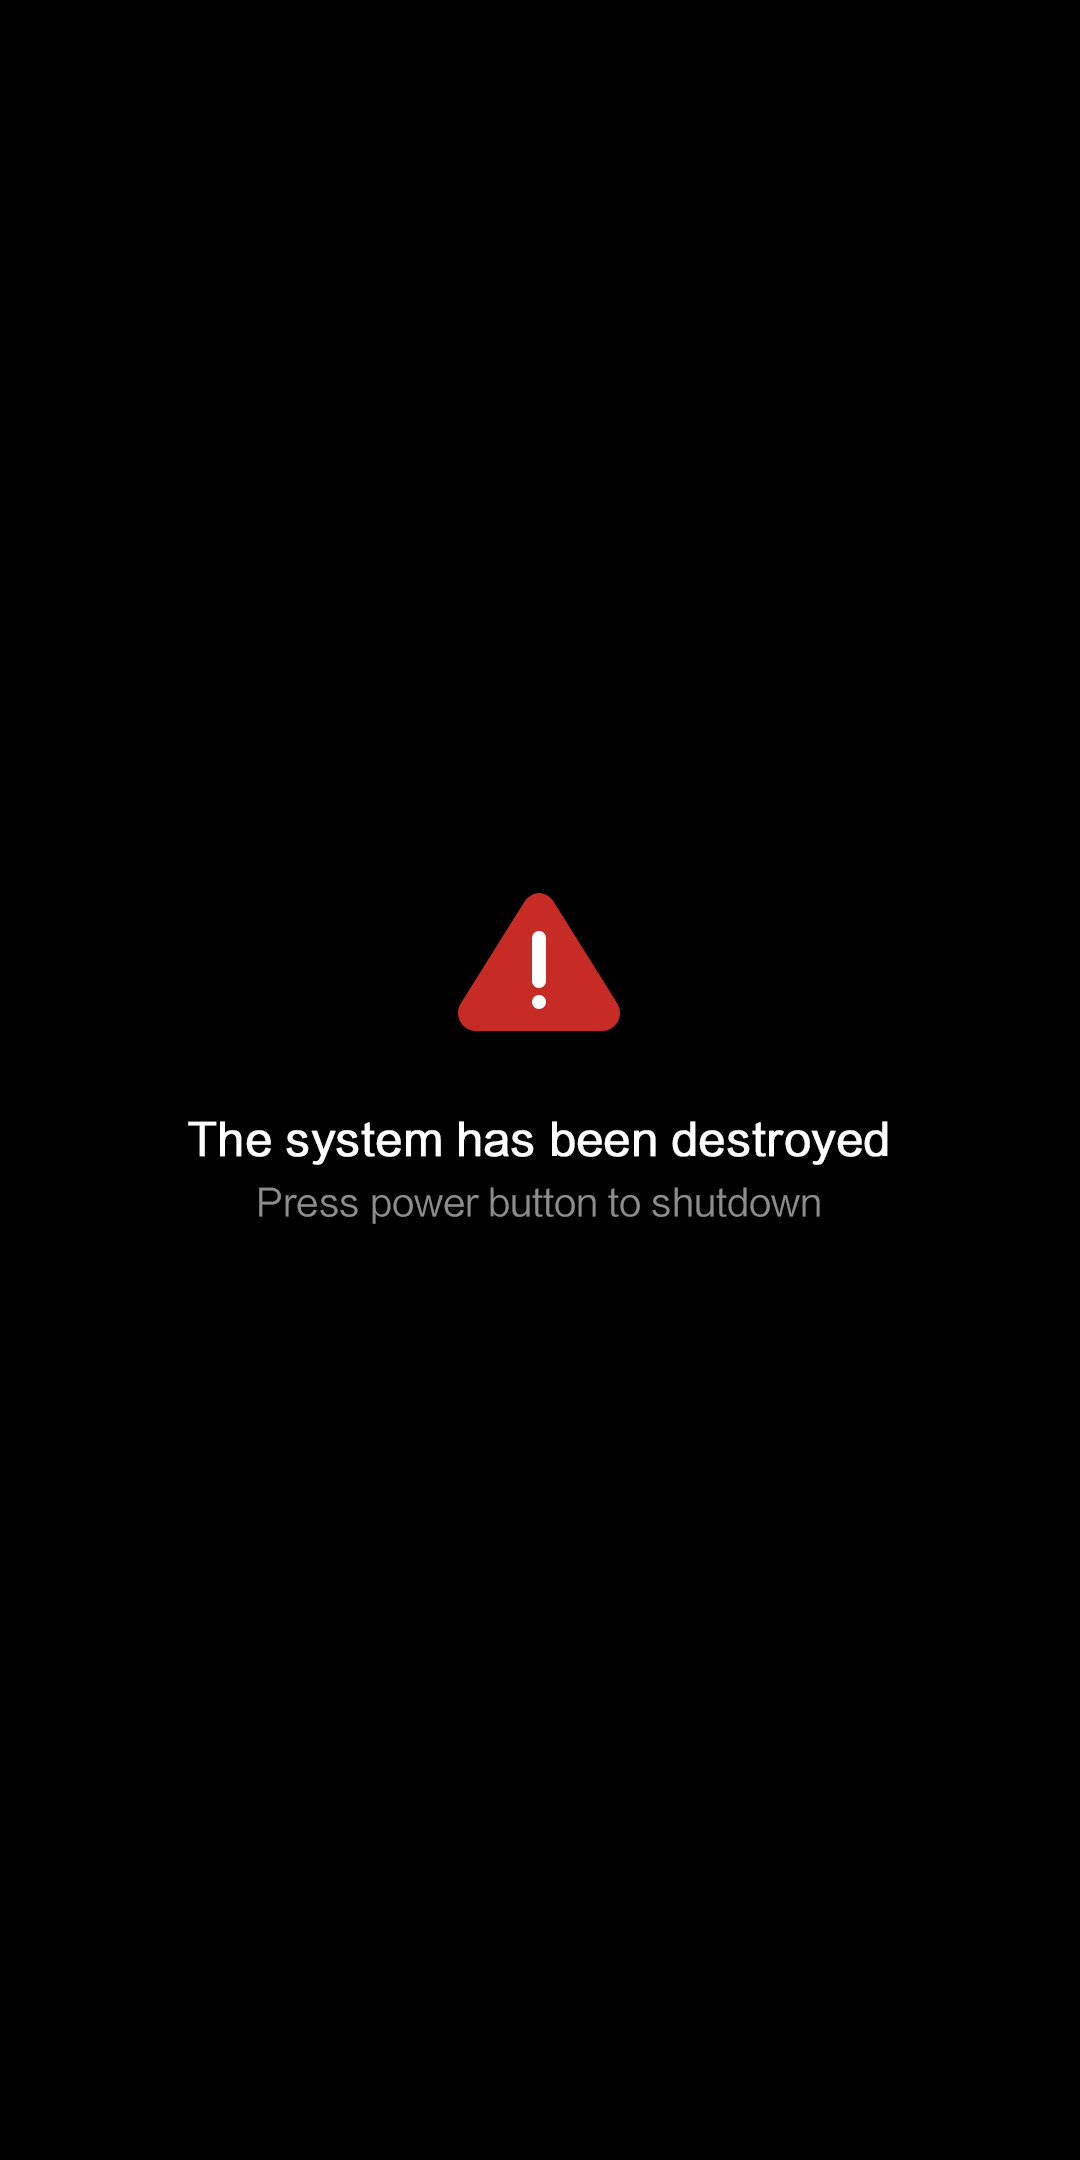 The system has been destroyed xiaomi redmi. The System has been destroyed. The System has been destroyed Xiaomi. The System has been destroyed Xiaomi что делать. The System has been destroyed обои.